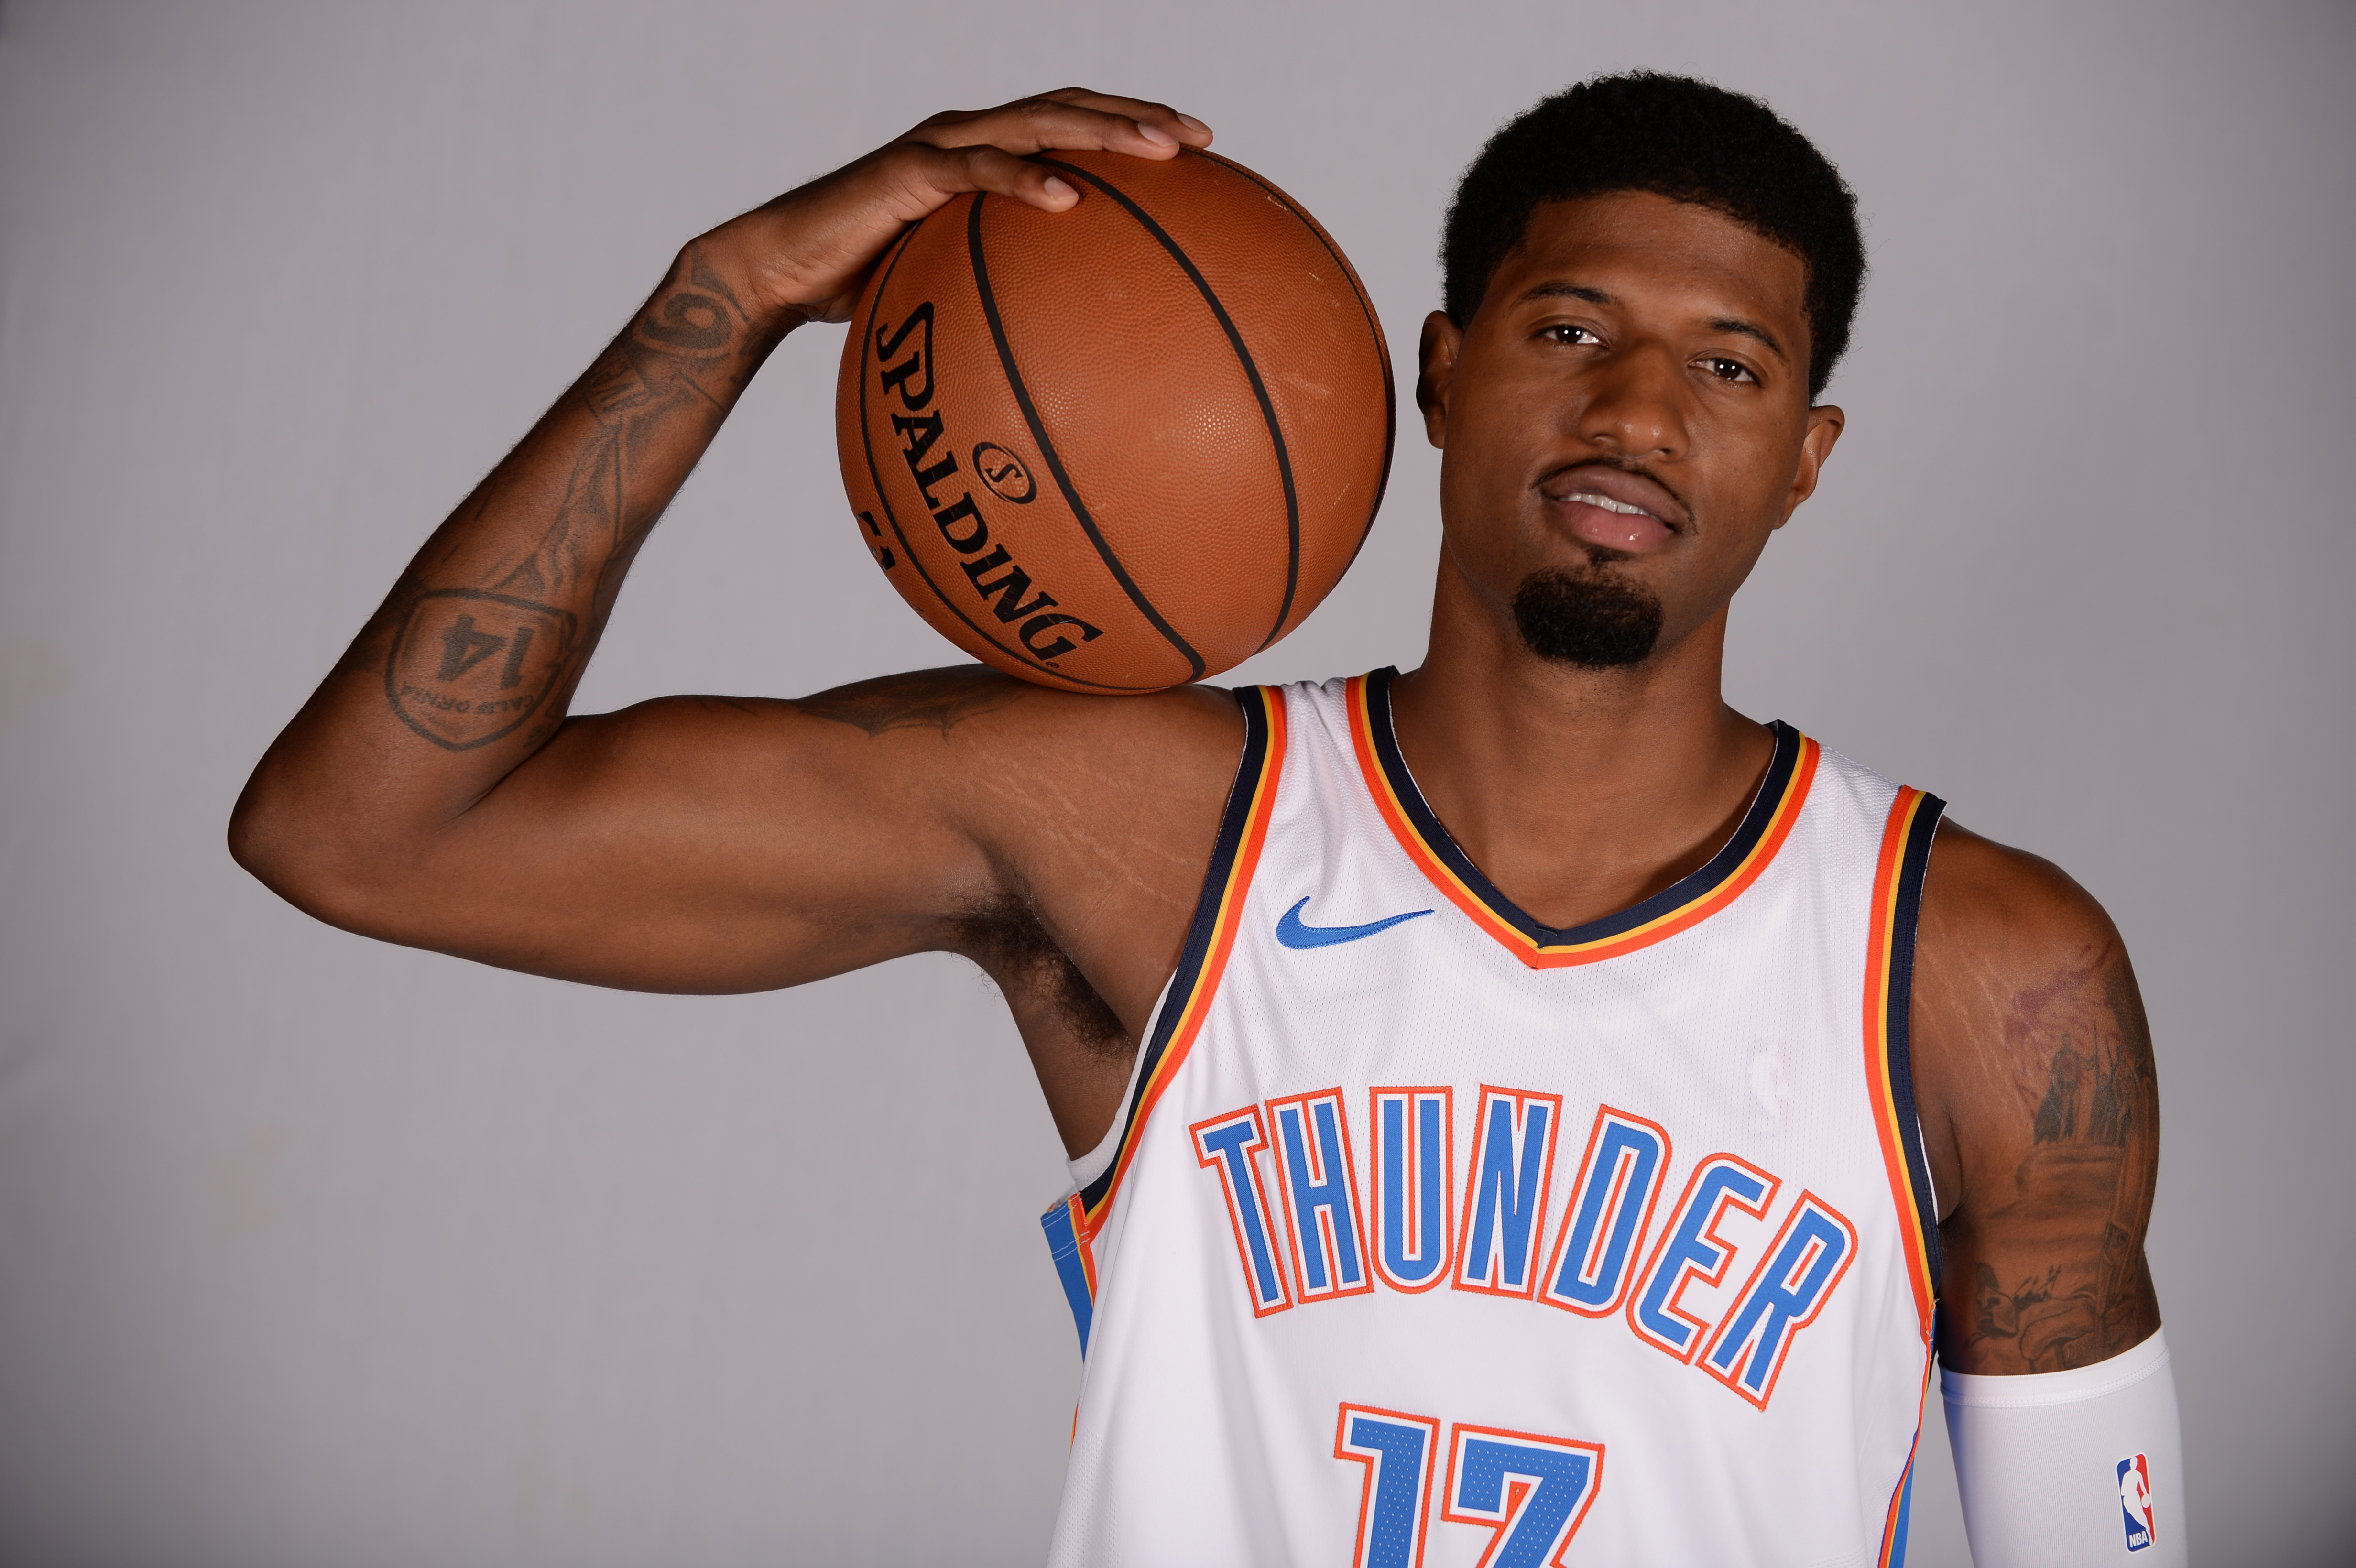 Paul George's return fuels high expectations for Thunder